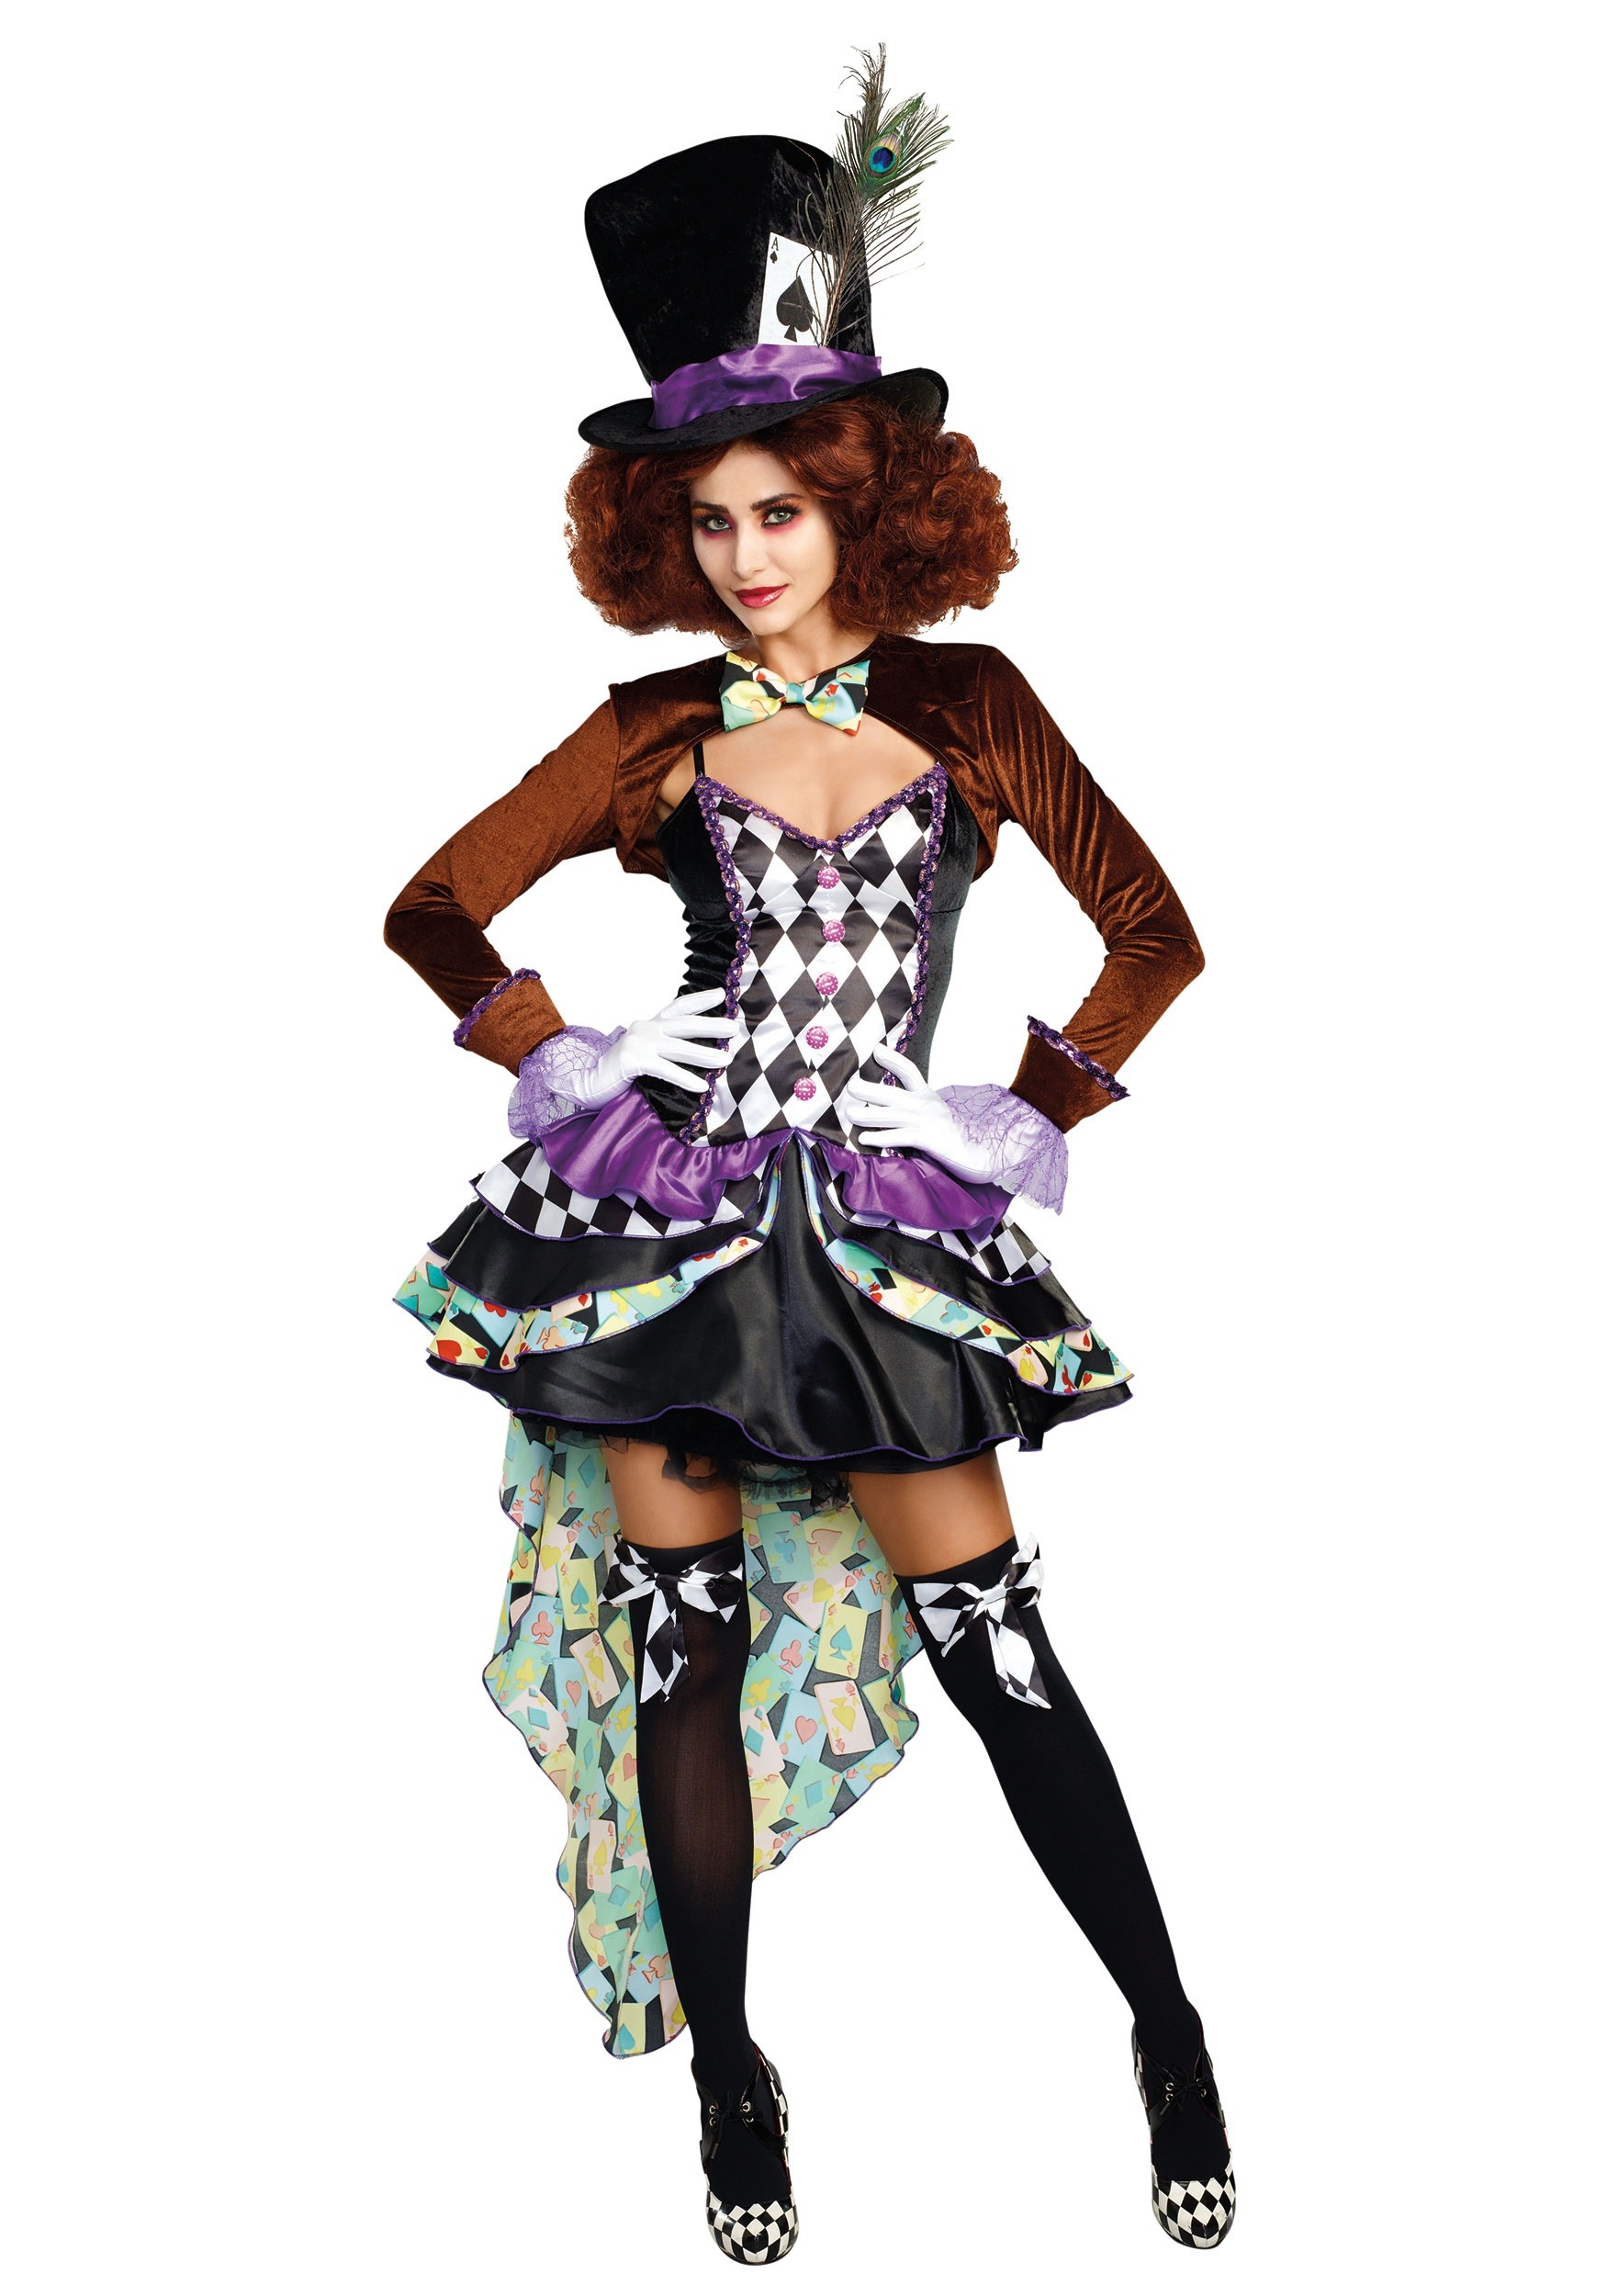 Image of Raving Mad Hatter Costume for Women | Tea Party Costume ID DR11162-M